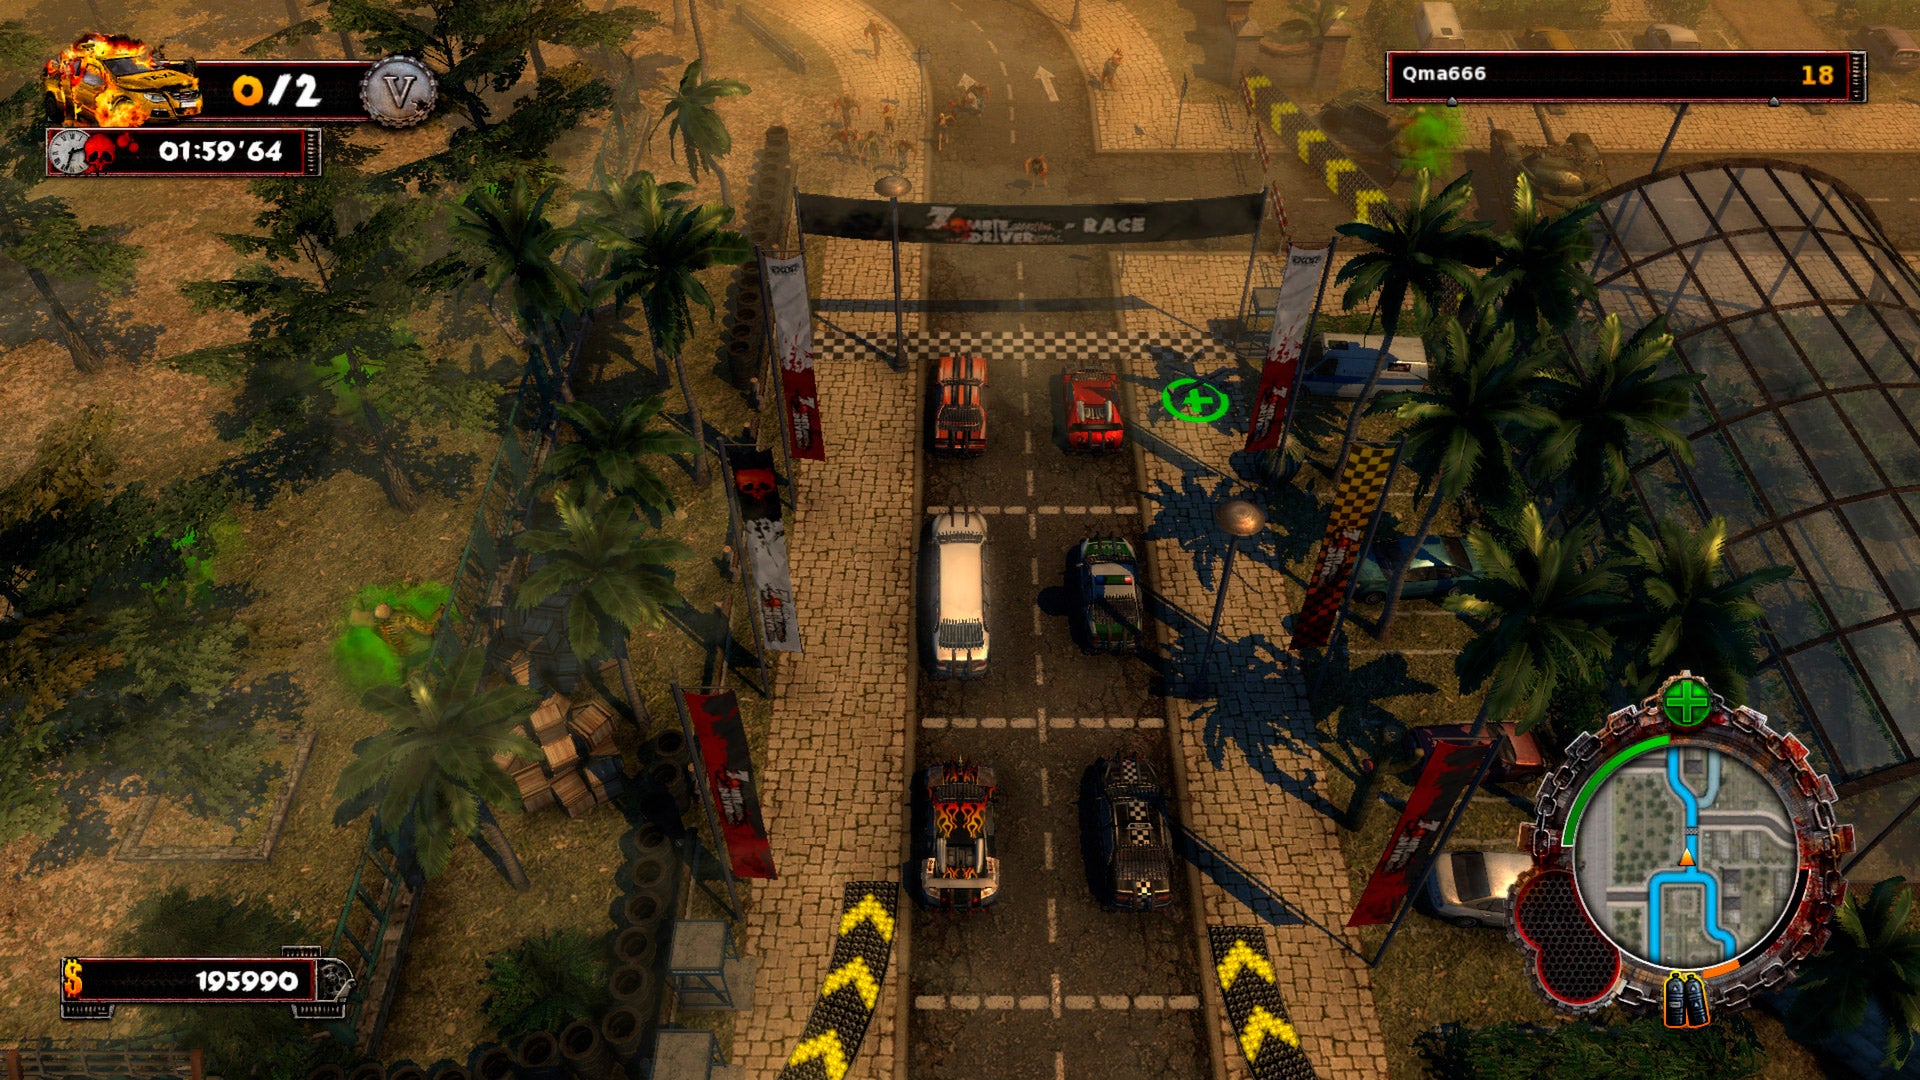 Zombie Driver HD Complete Edition